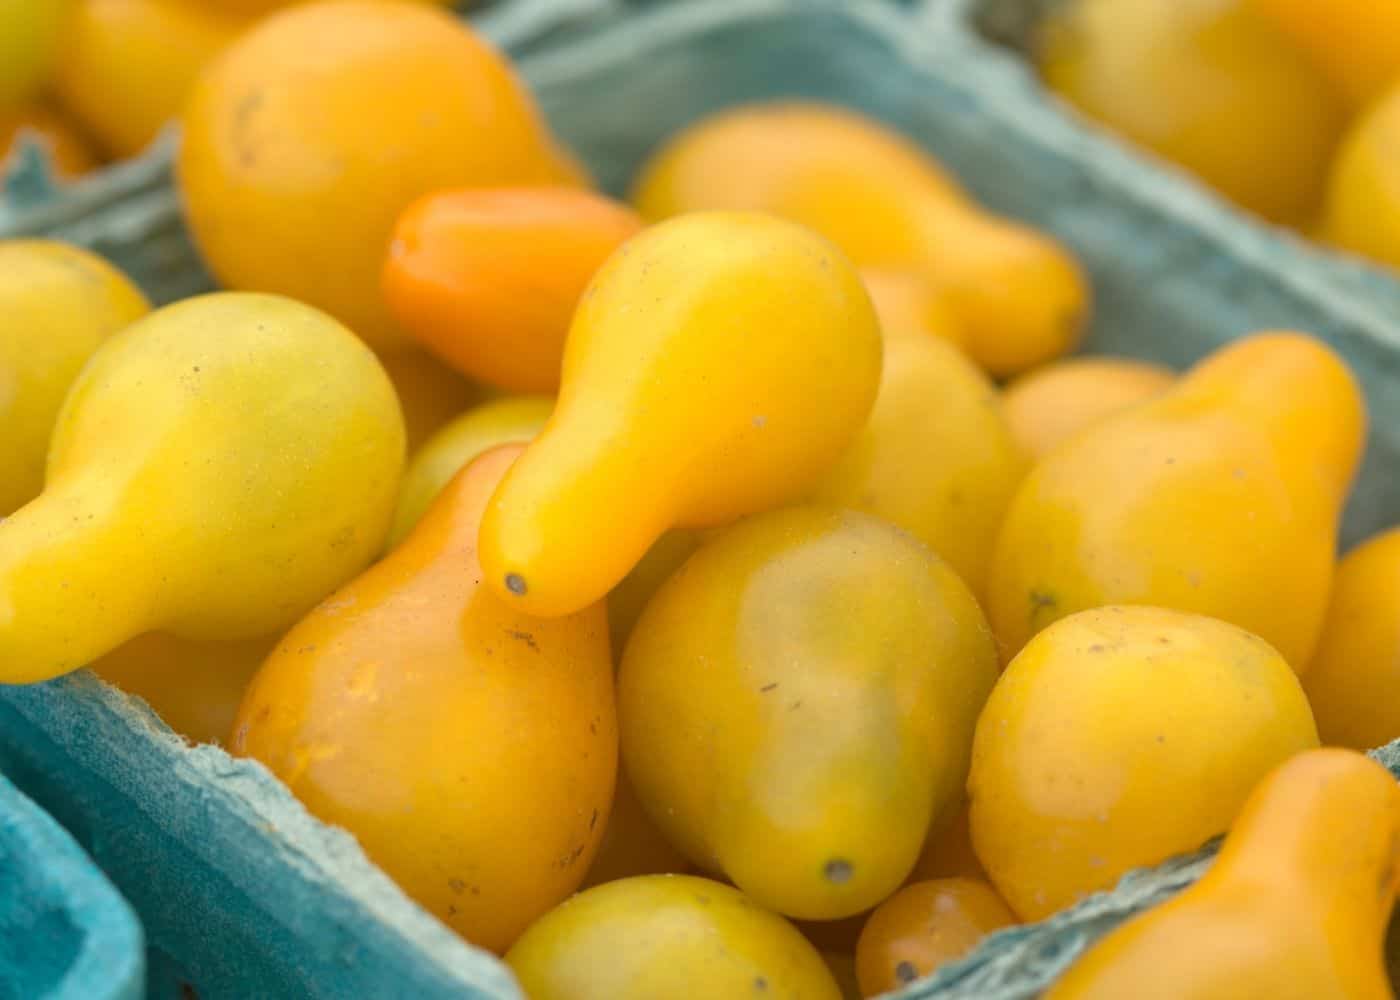 yellow pear tomatoes at farmers market